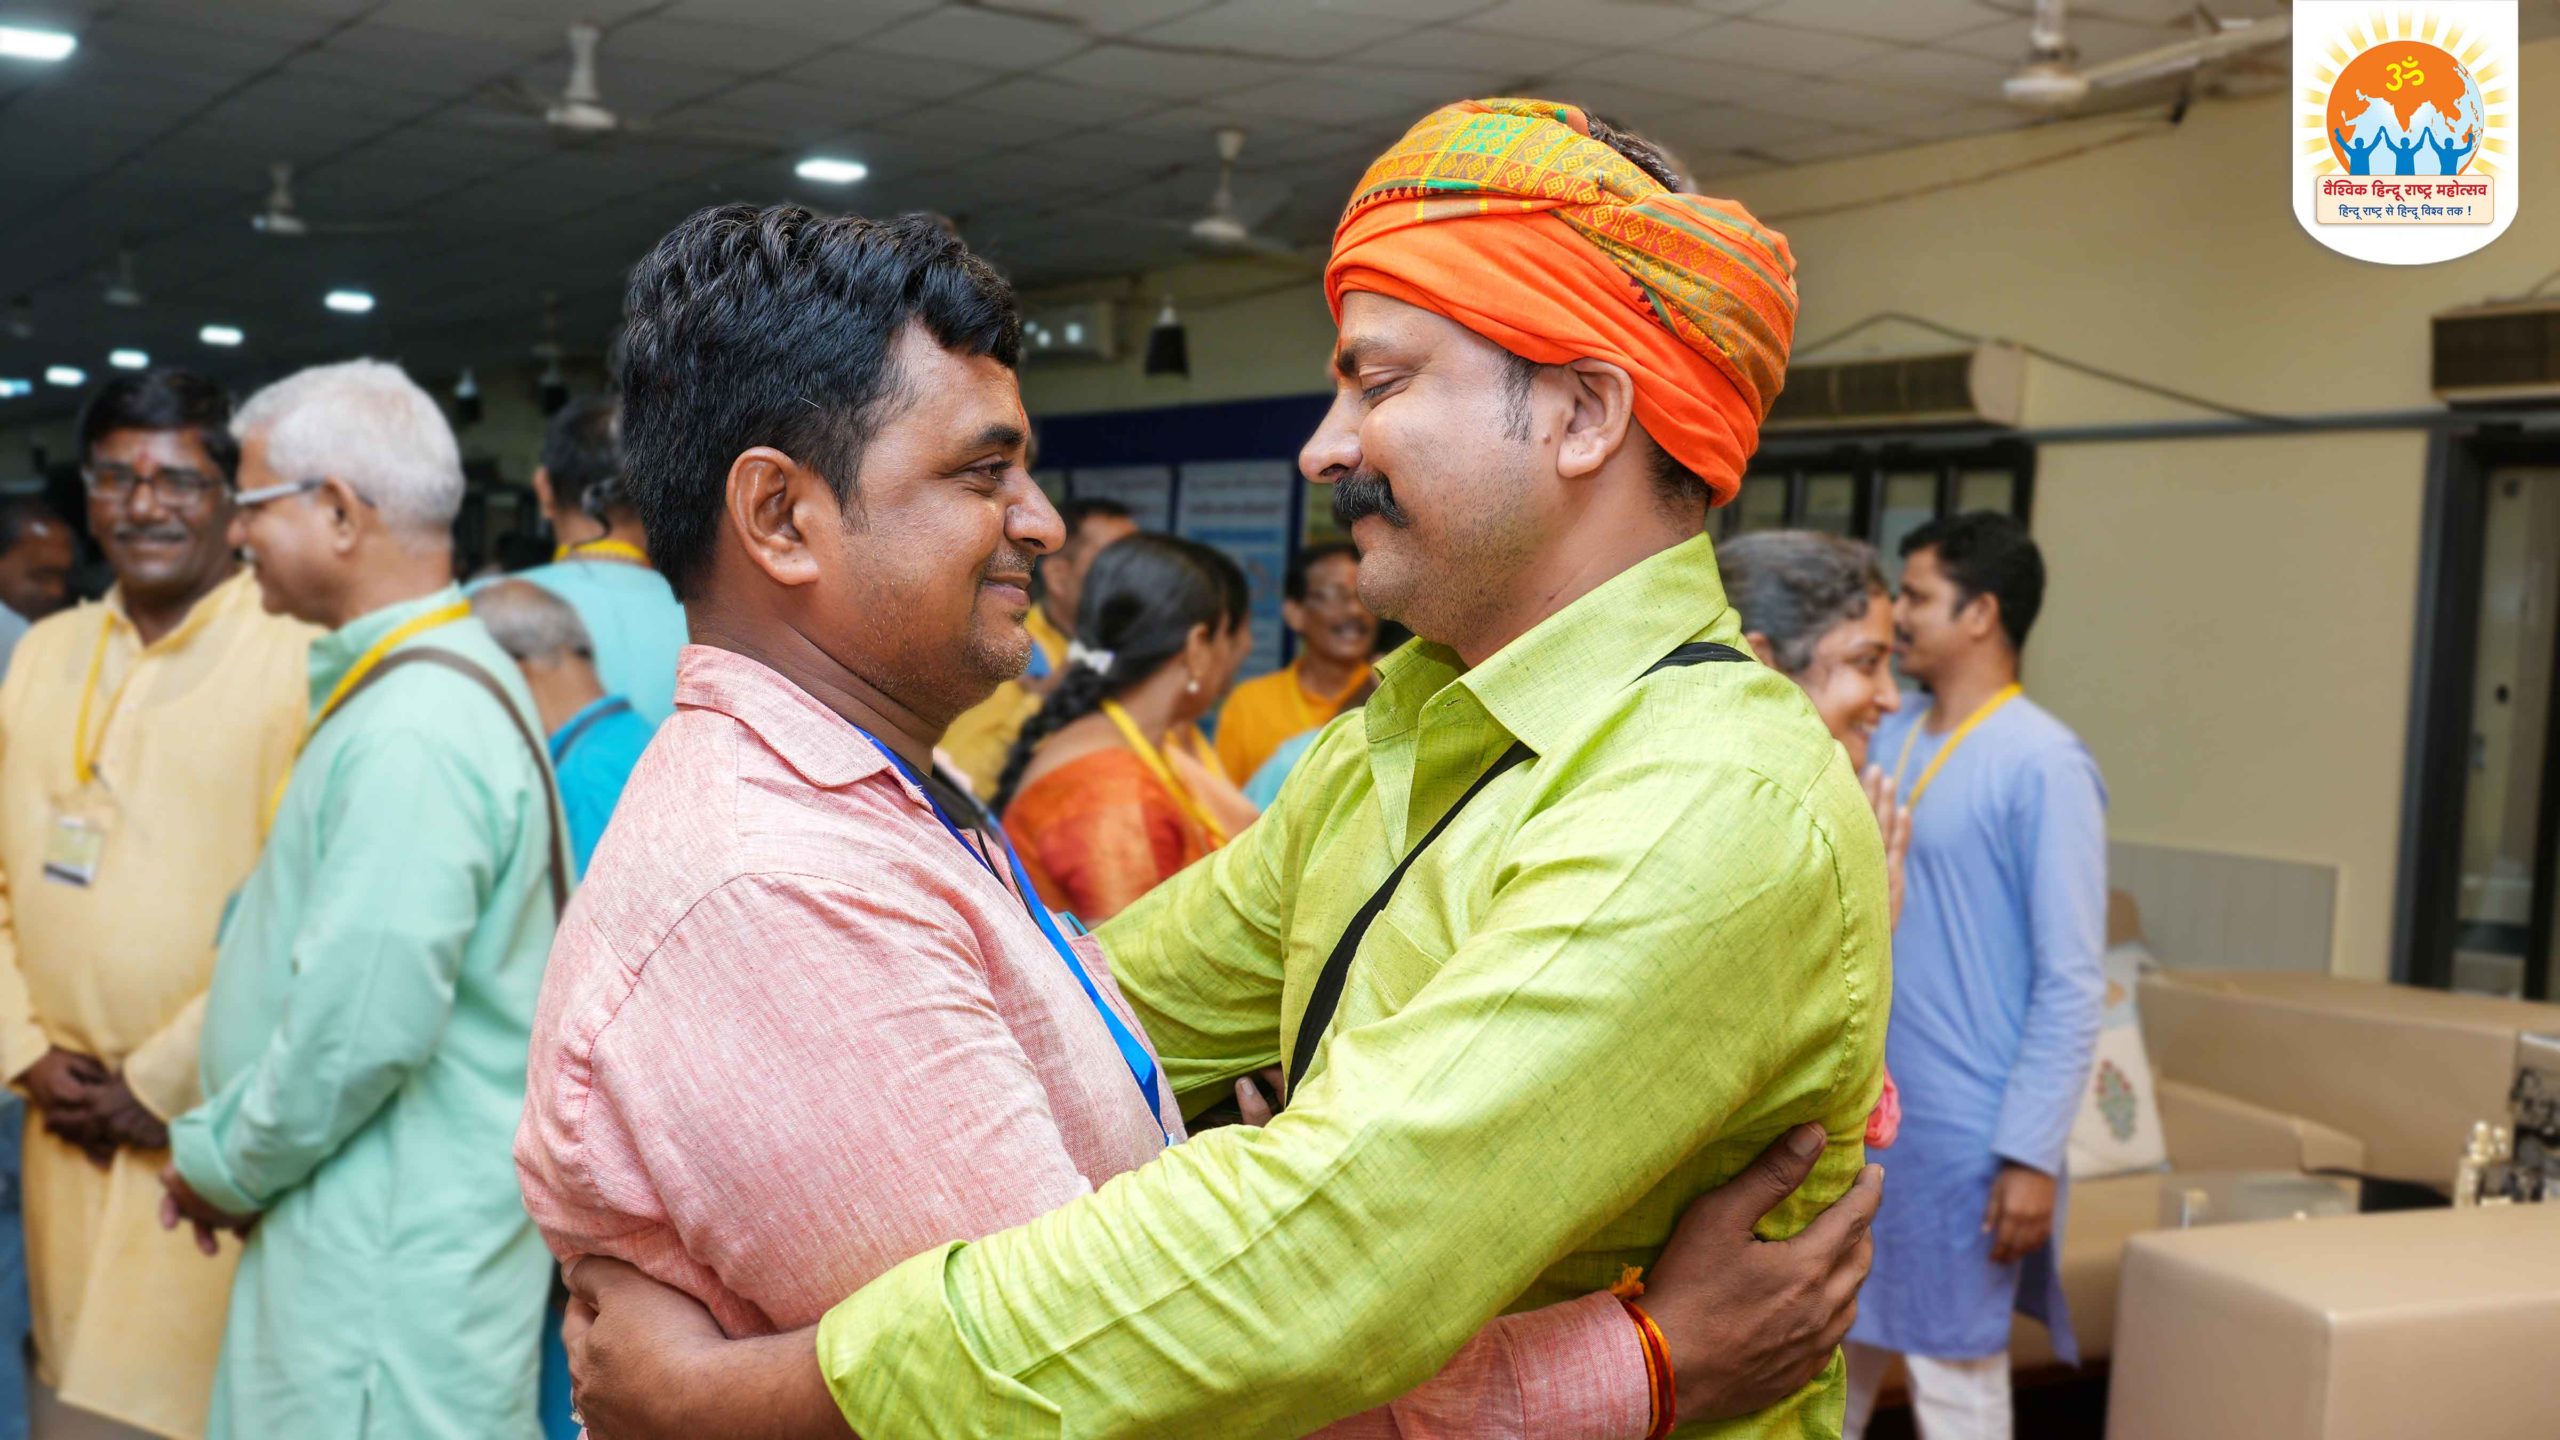 A moment that captures the sense of togetherness developed during the 'Viashvik Hindu Rashtra Mahotsav'; devout Hindu participants from different States experssing their love and respect by hugging oneanother